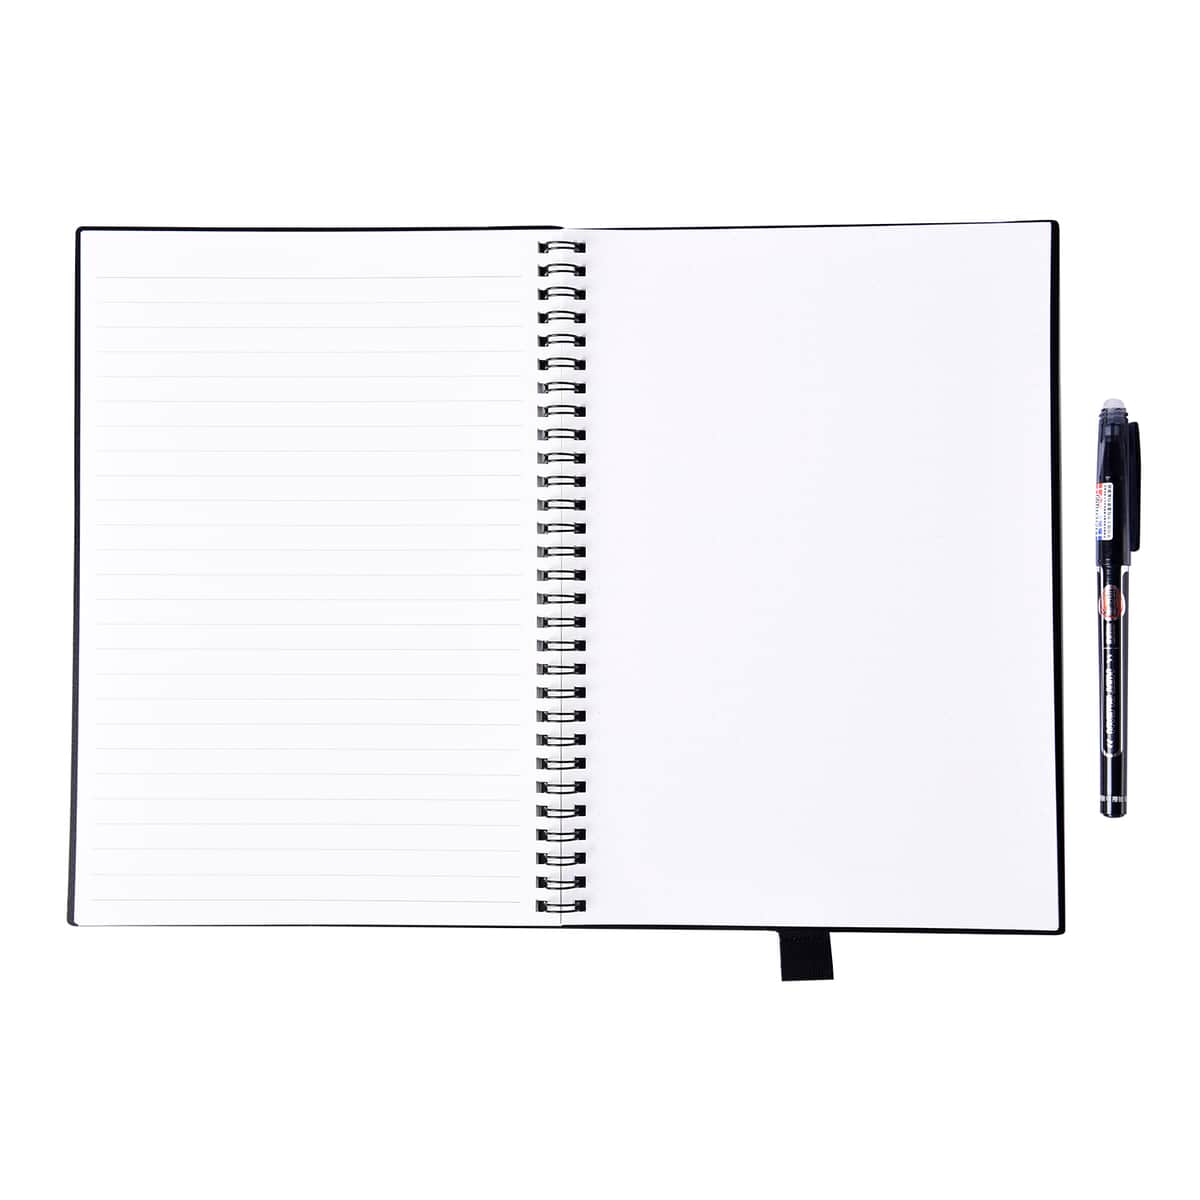 Black B5 Size Smart Reusable Dot Grid Eco Friendly Notebook with 1 Smudge Proof Reusable Ink Pen with erasable rubber image number 4